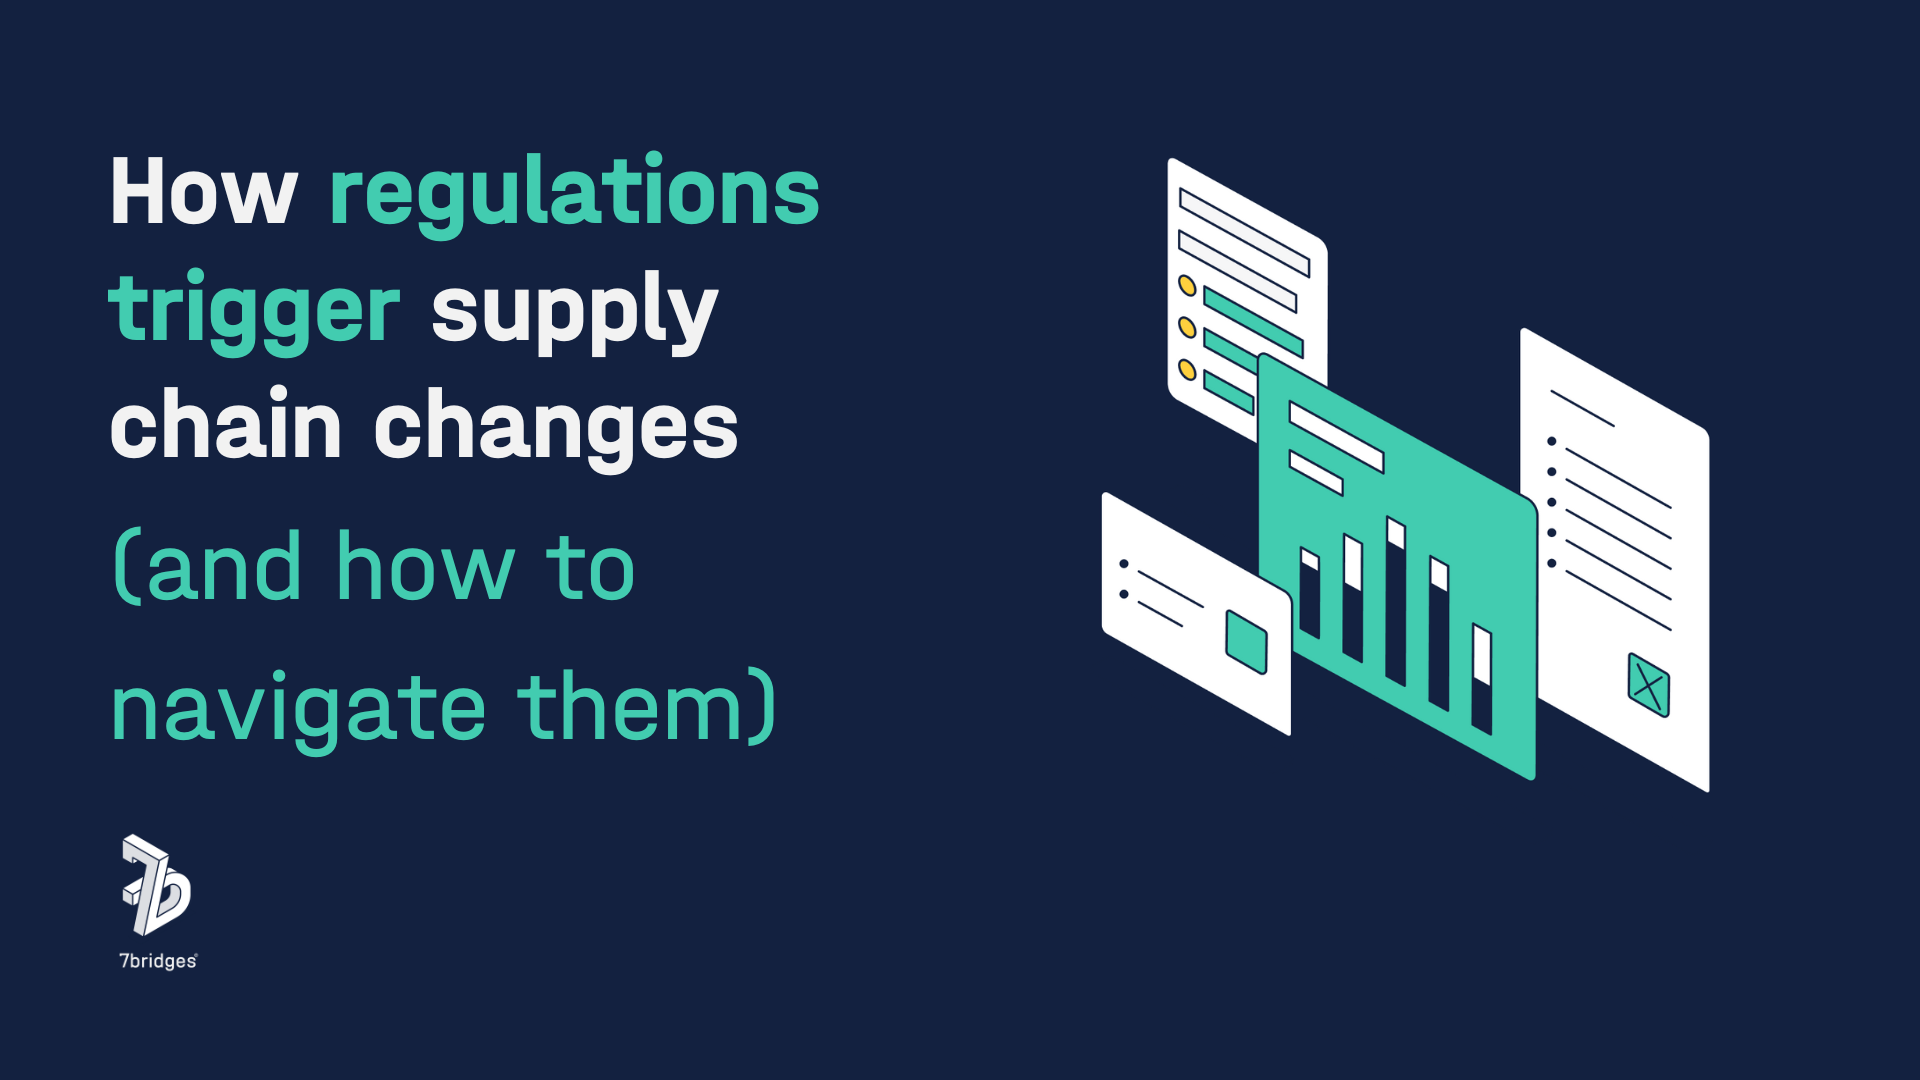 How regulations trigger supply chain changes title on blue background with illustrations of graphs and documents to the right